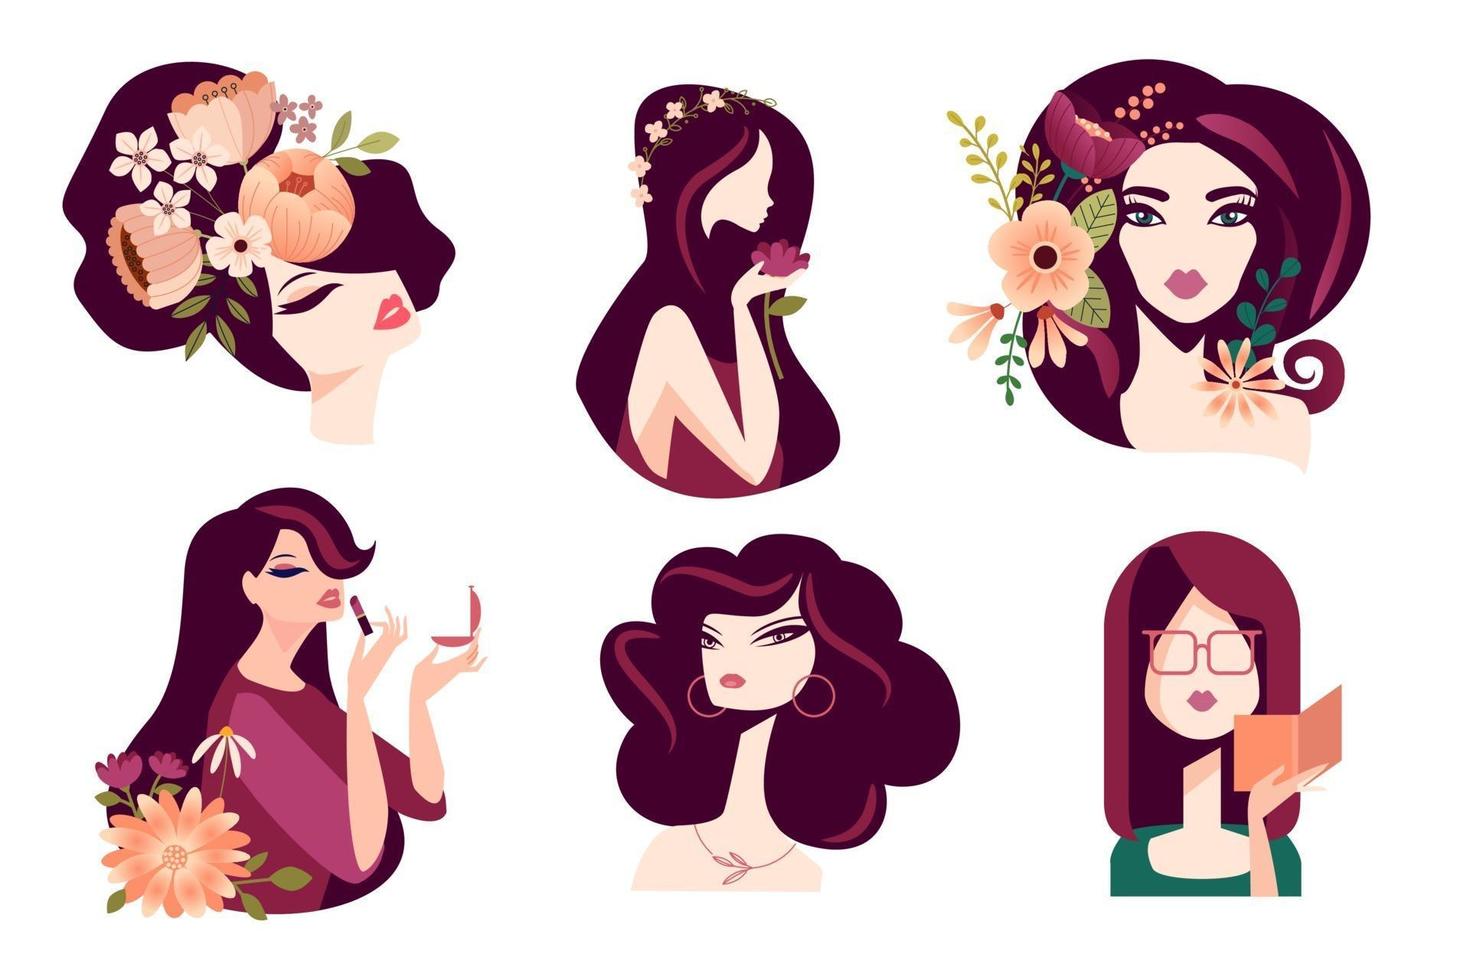 Set of woman illustration concepts for beauty, cosmetics, fashion. Flat design vector for graphic and web design, marketing material, social media, textile design.